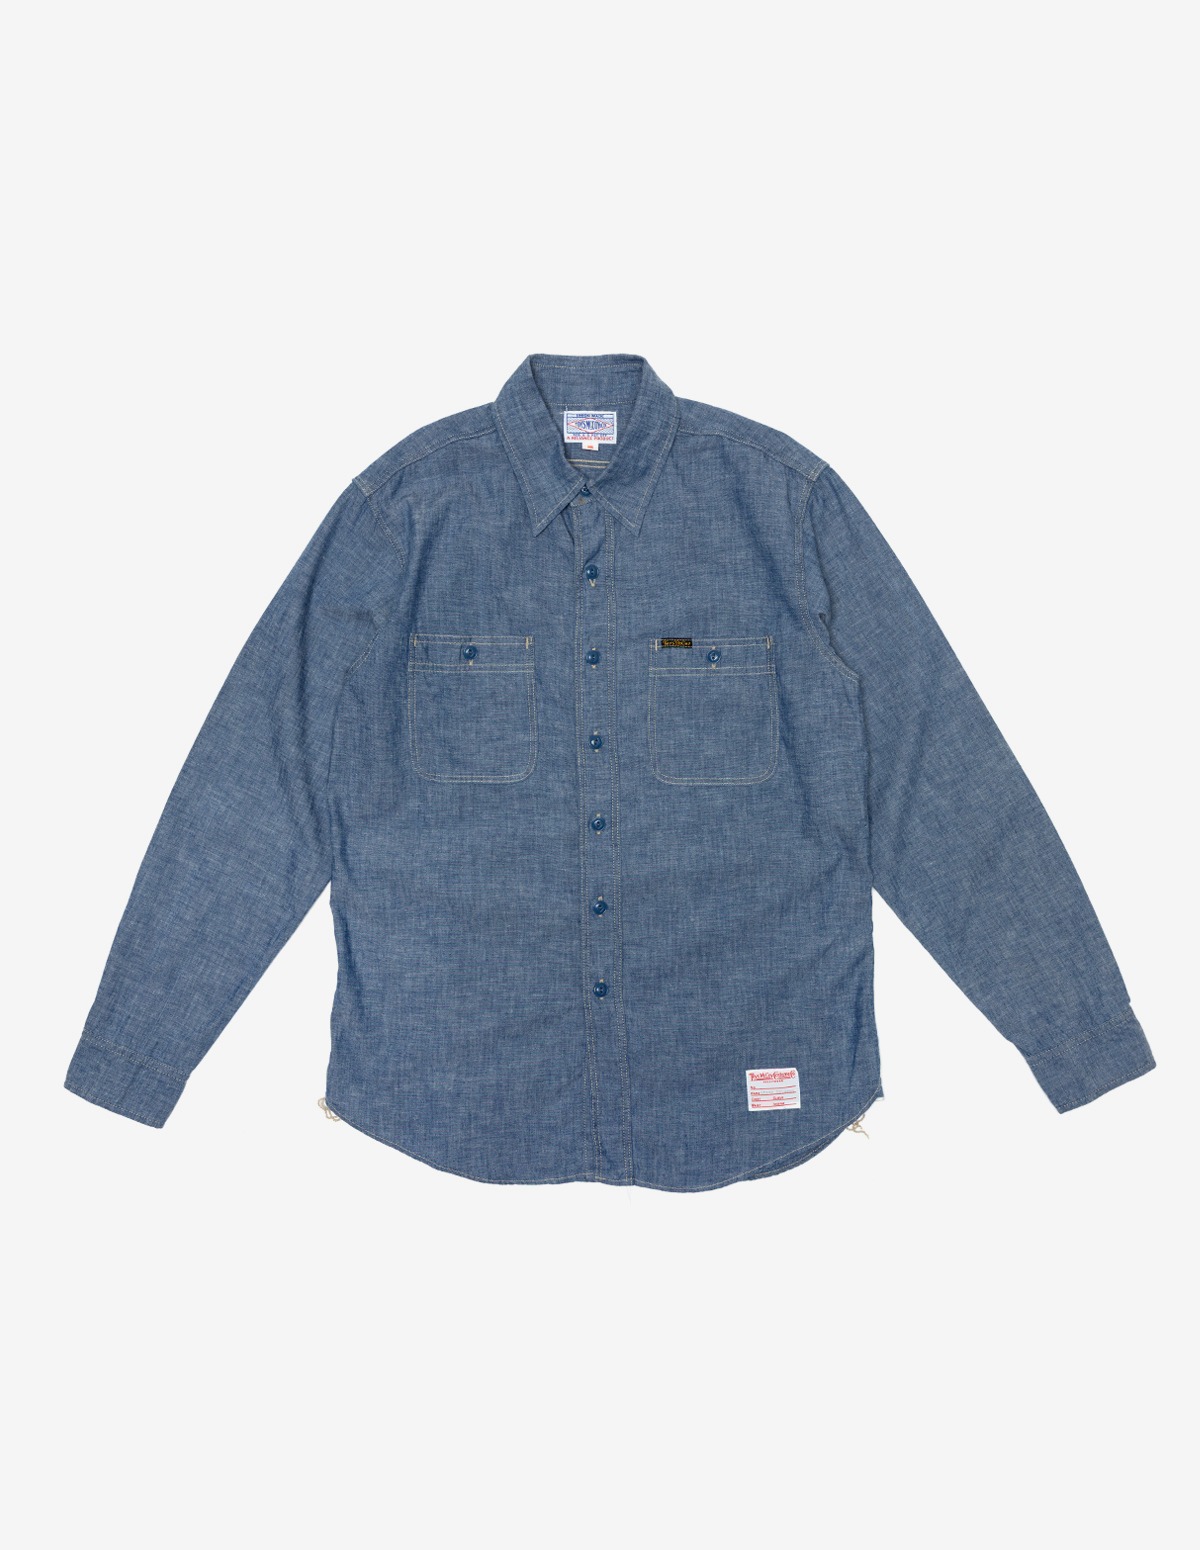 TMS2205 McHILL OVERALLS CHAMBRAY WORK SHIRT &quot;STEVE McQUEEN&quot;